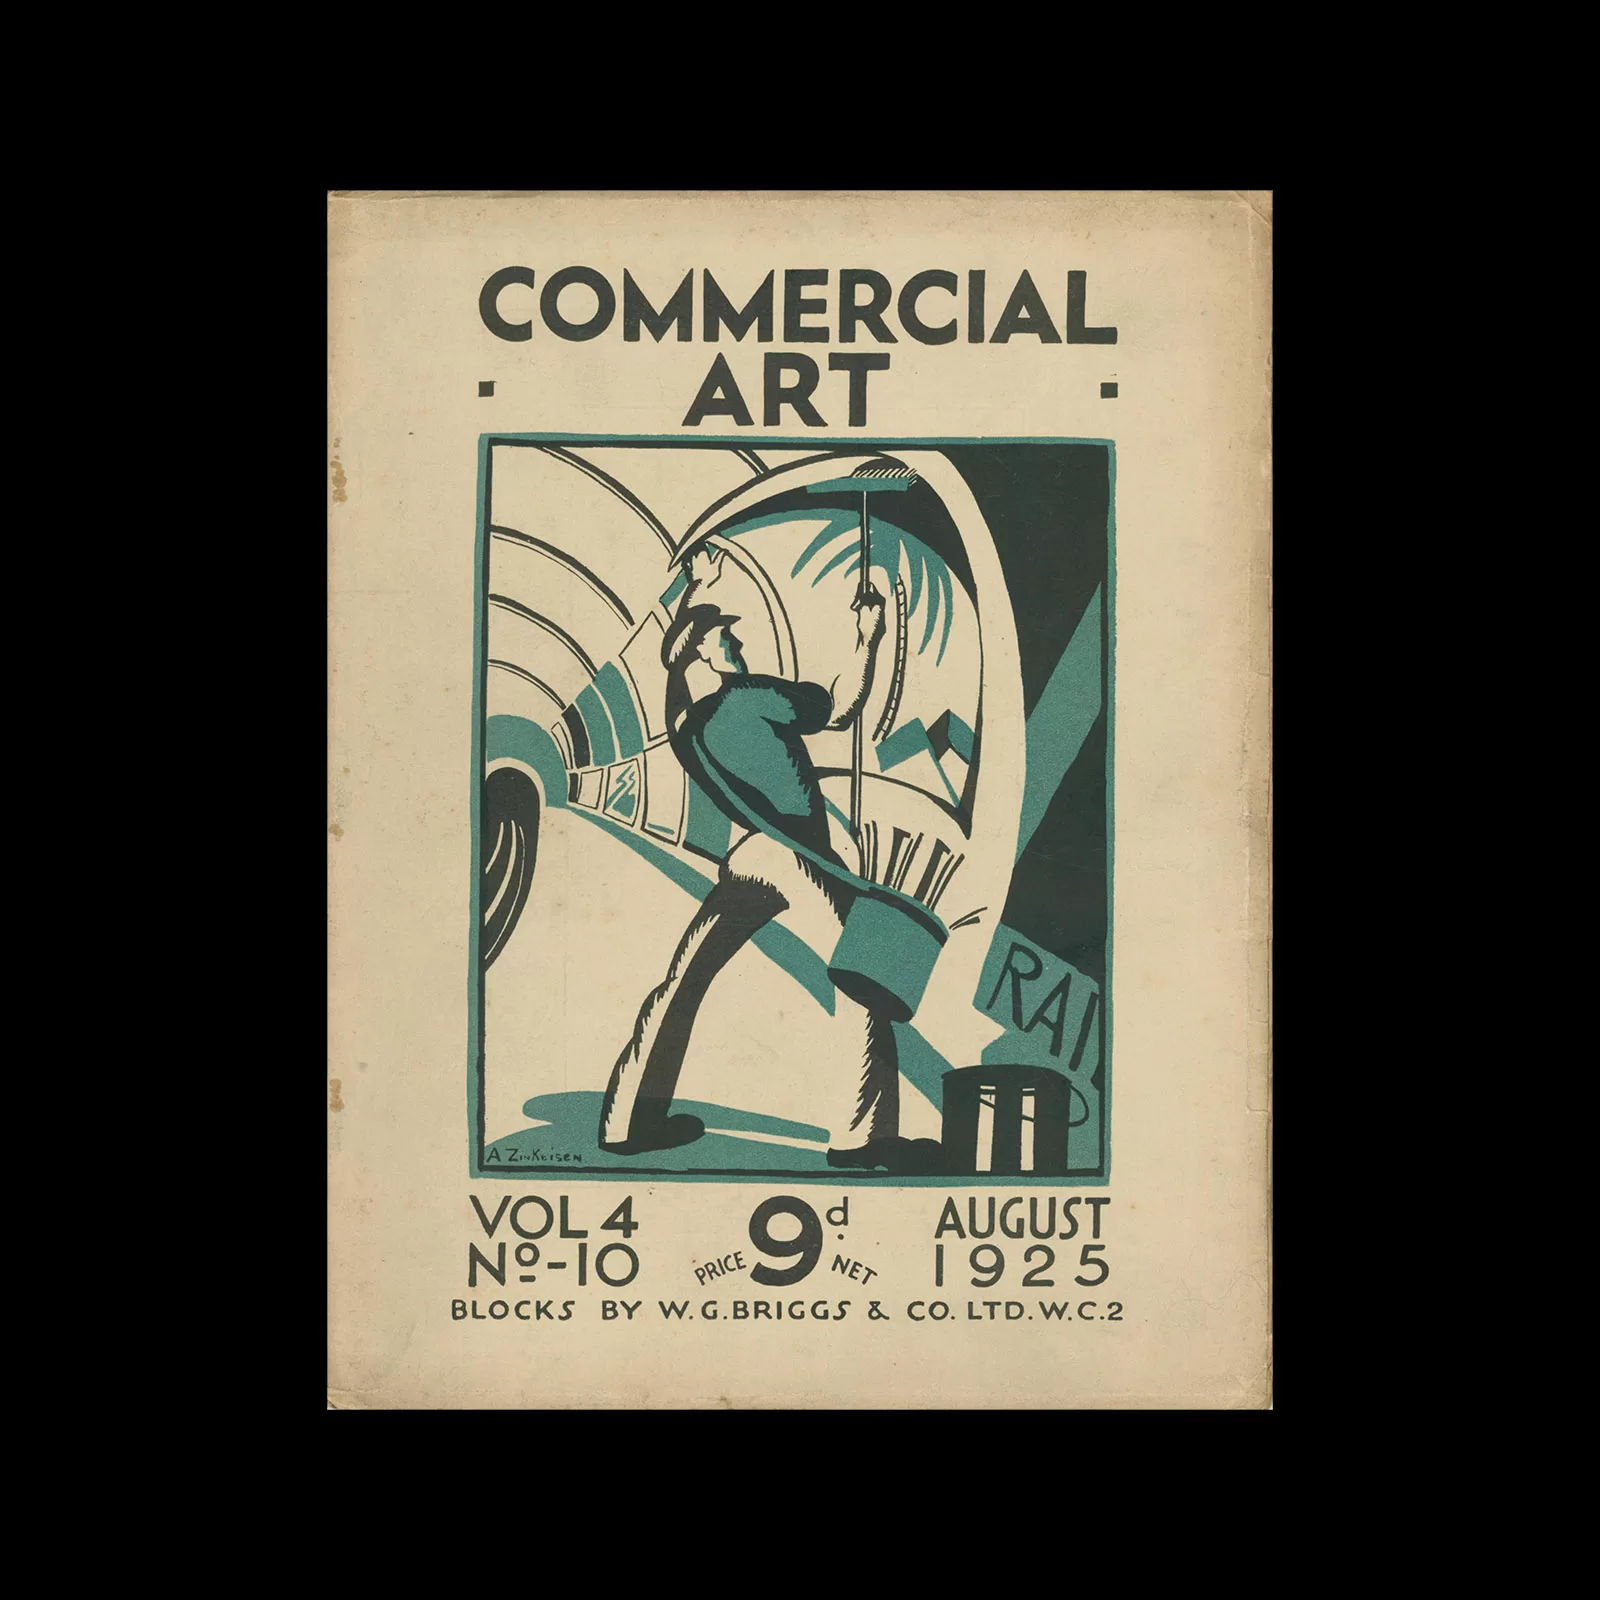 Commercial Art Vol 4, No 10, August 1925. Cover design by Anna Zinkeisen